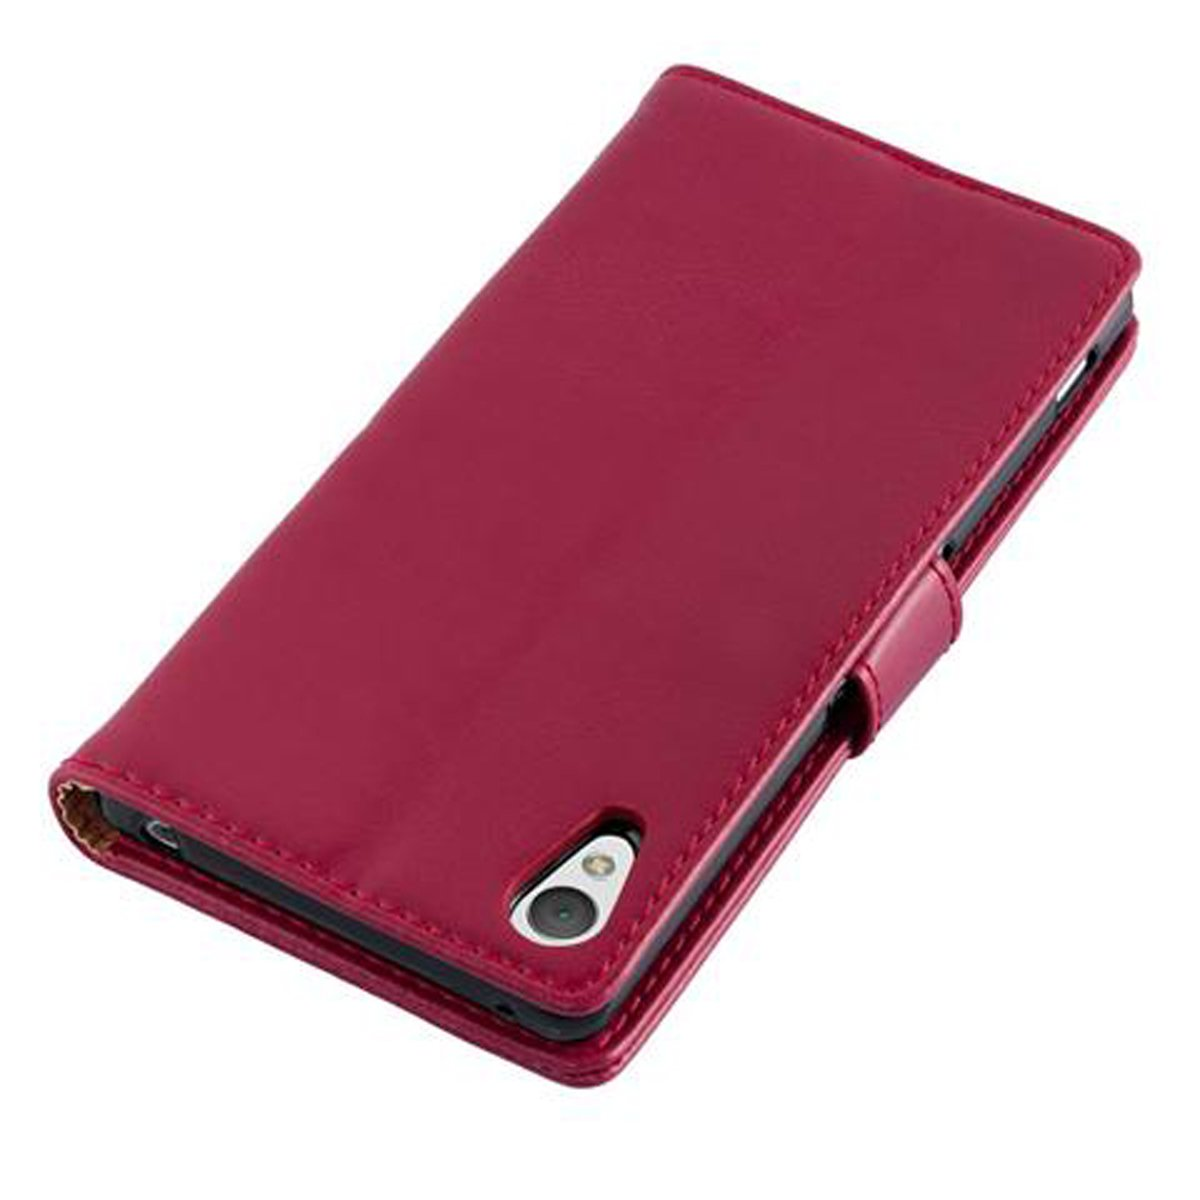 Sony, WEIN Bookcover, / Luxury Hülle ROT CADORABO Z4, Book Style, PLUS Xperia Z3